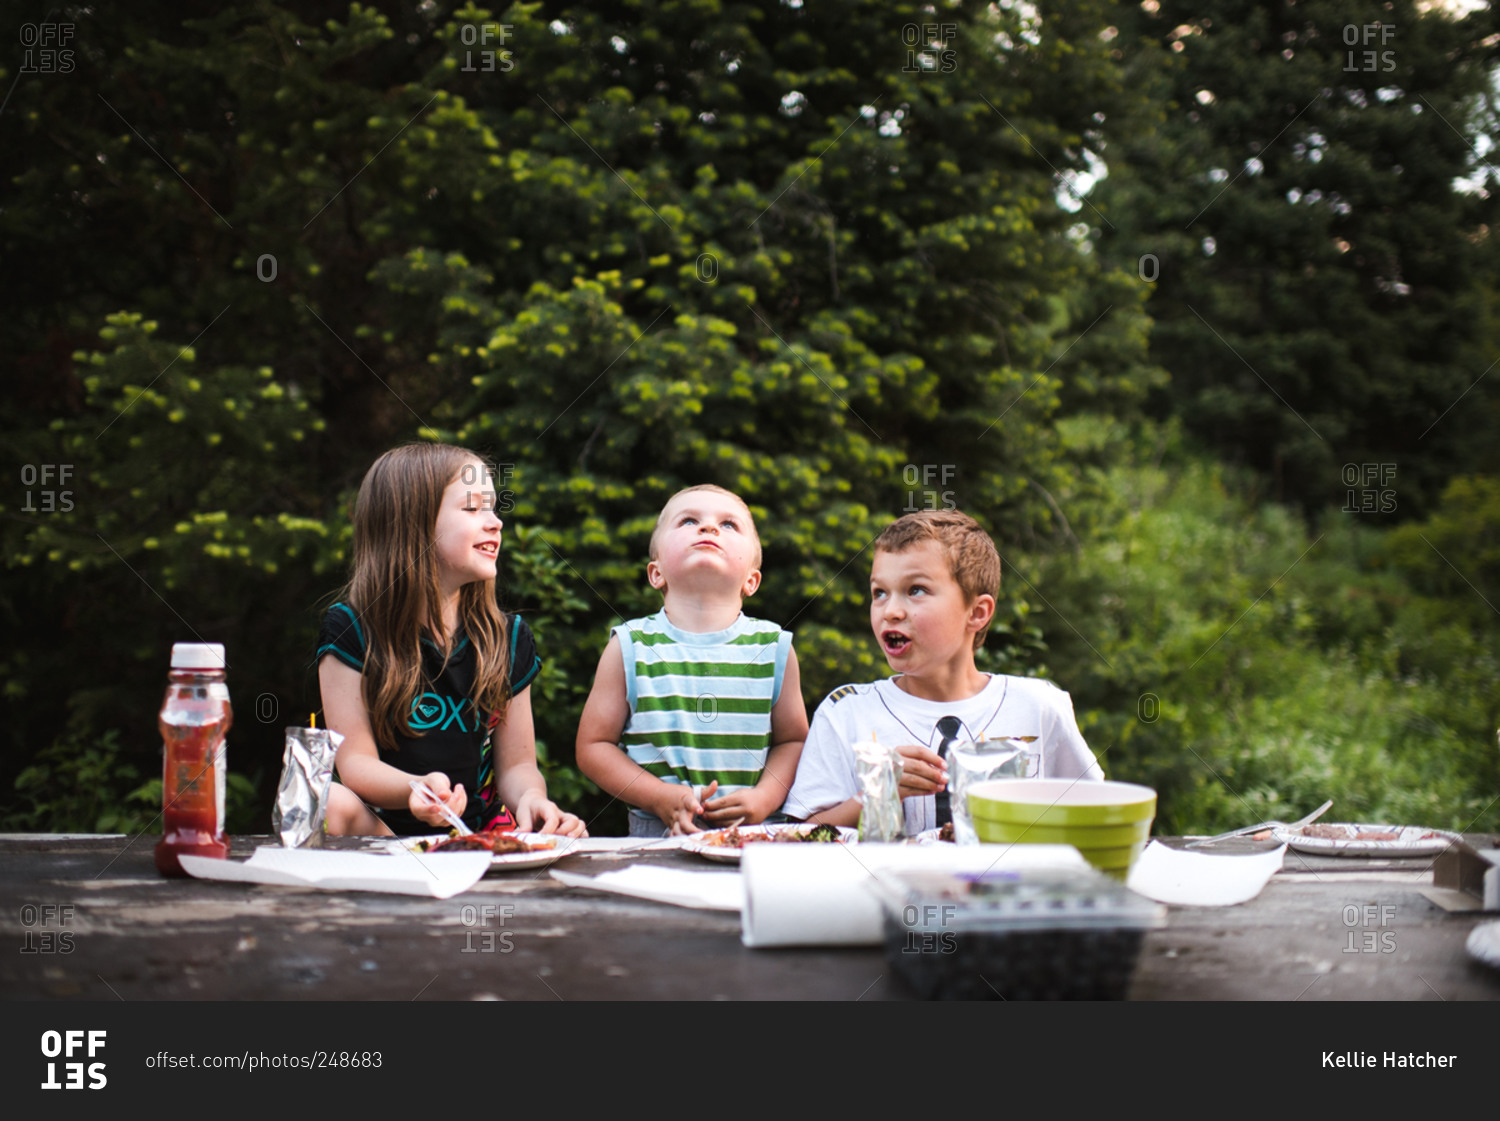 Children eating at a campground picnic table